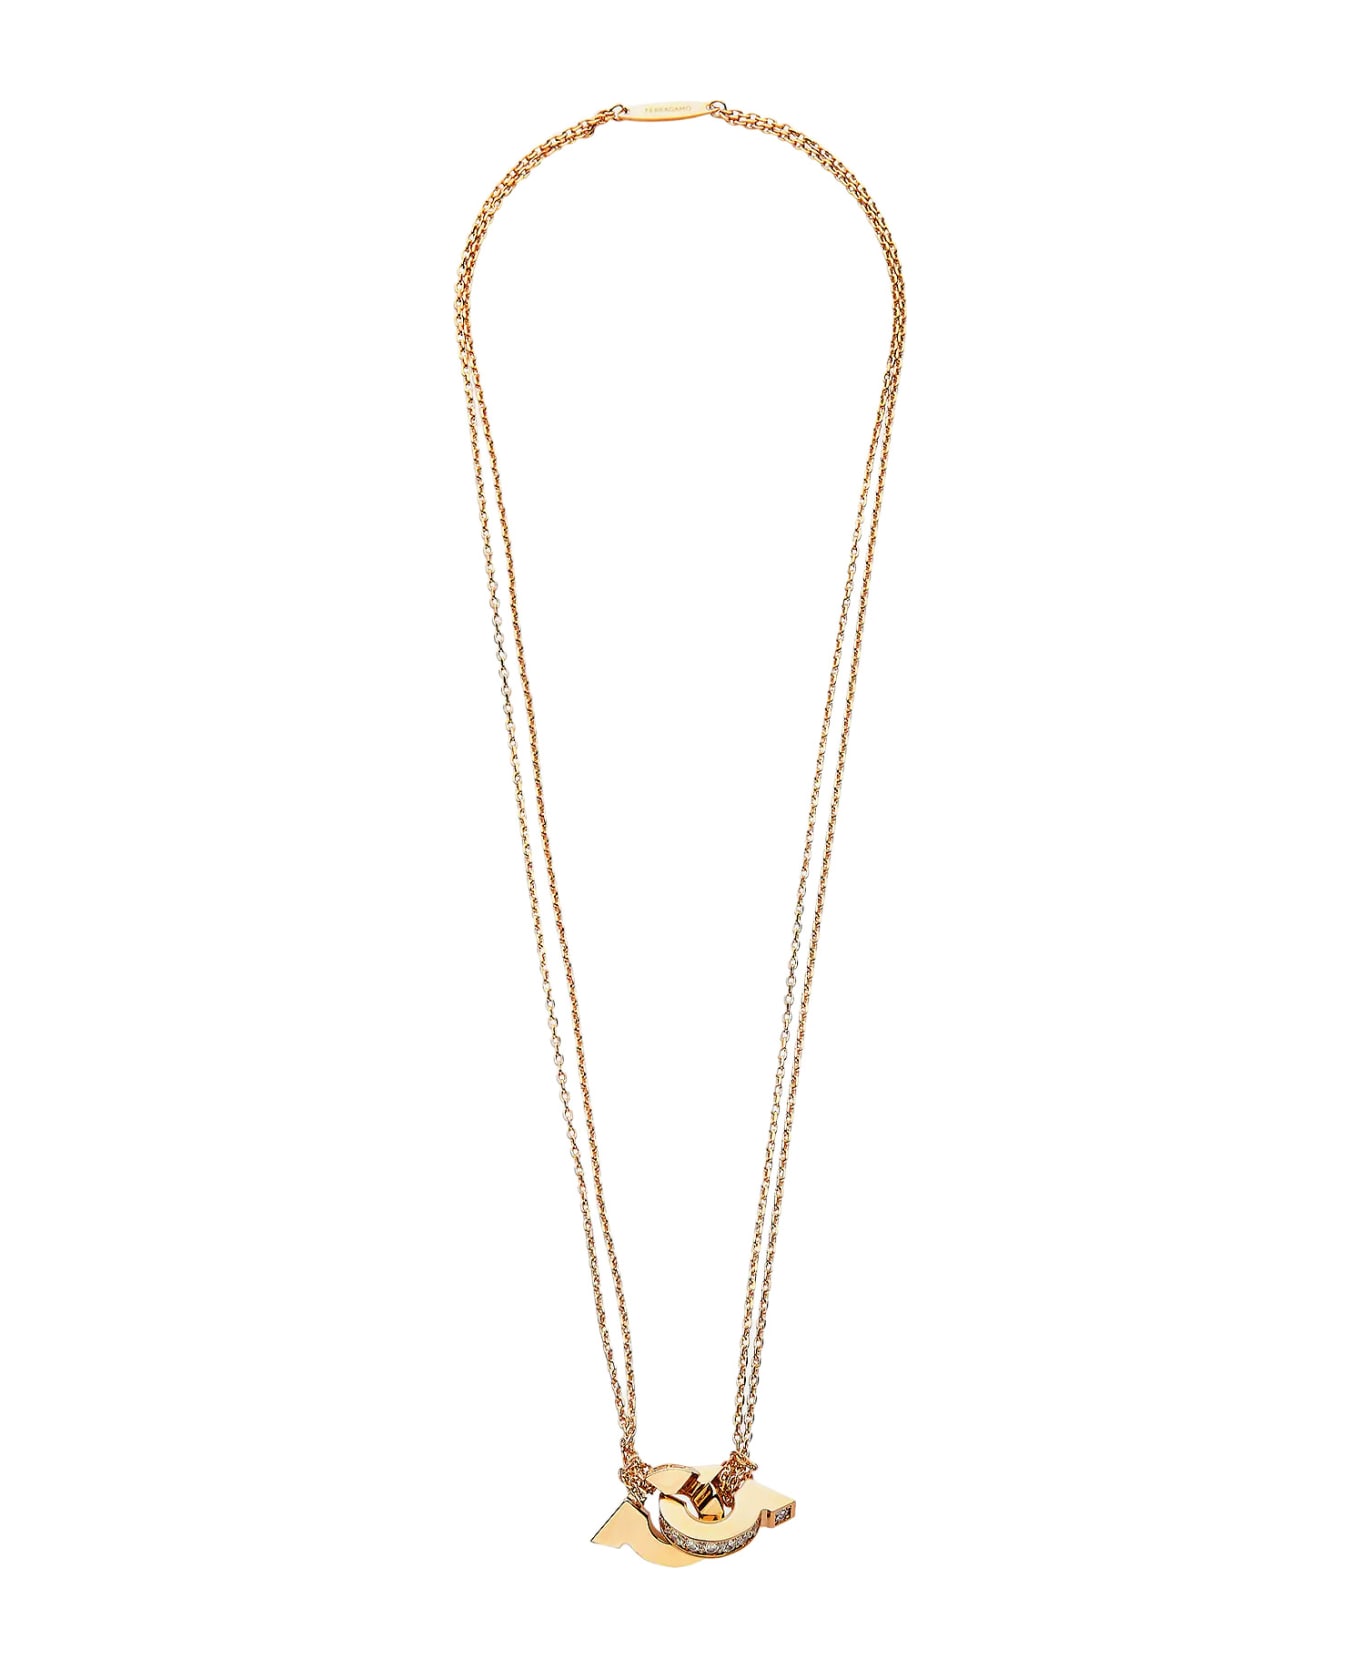 Ferragamo Necklace - Gold ネックレス